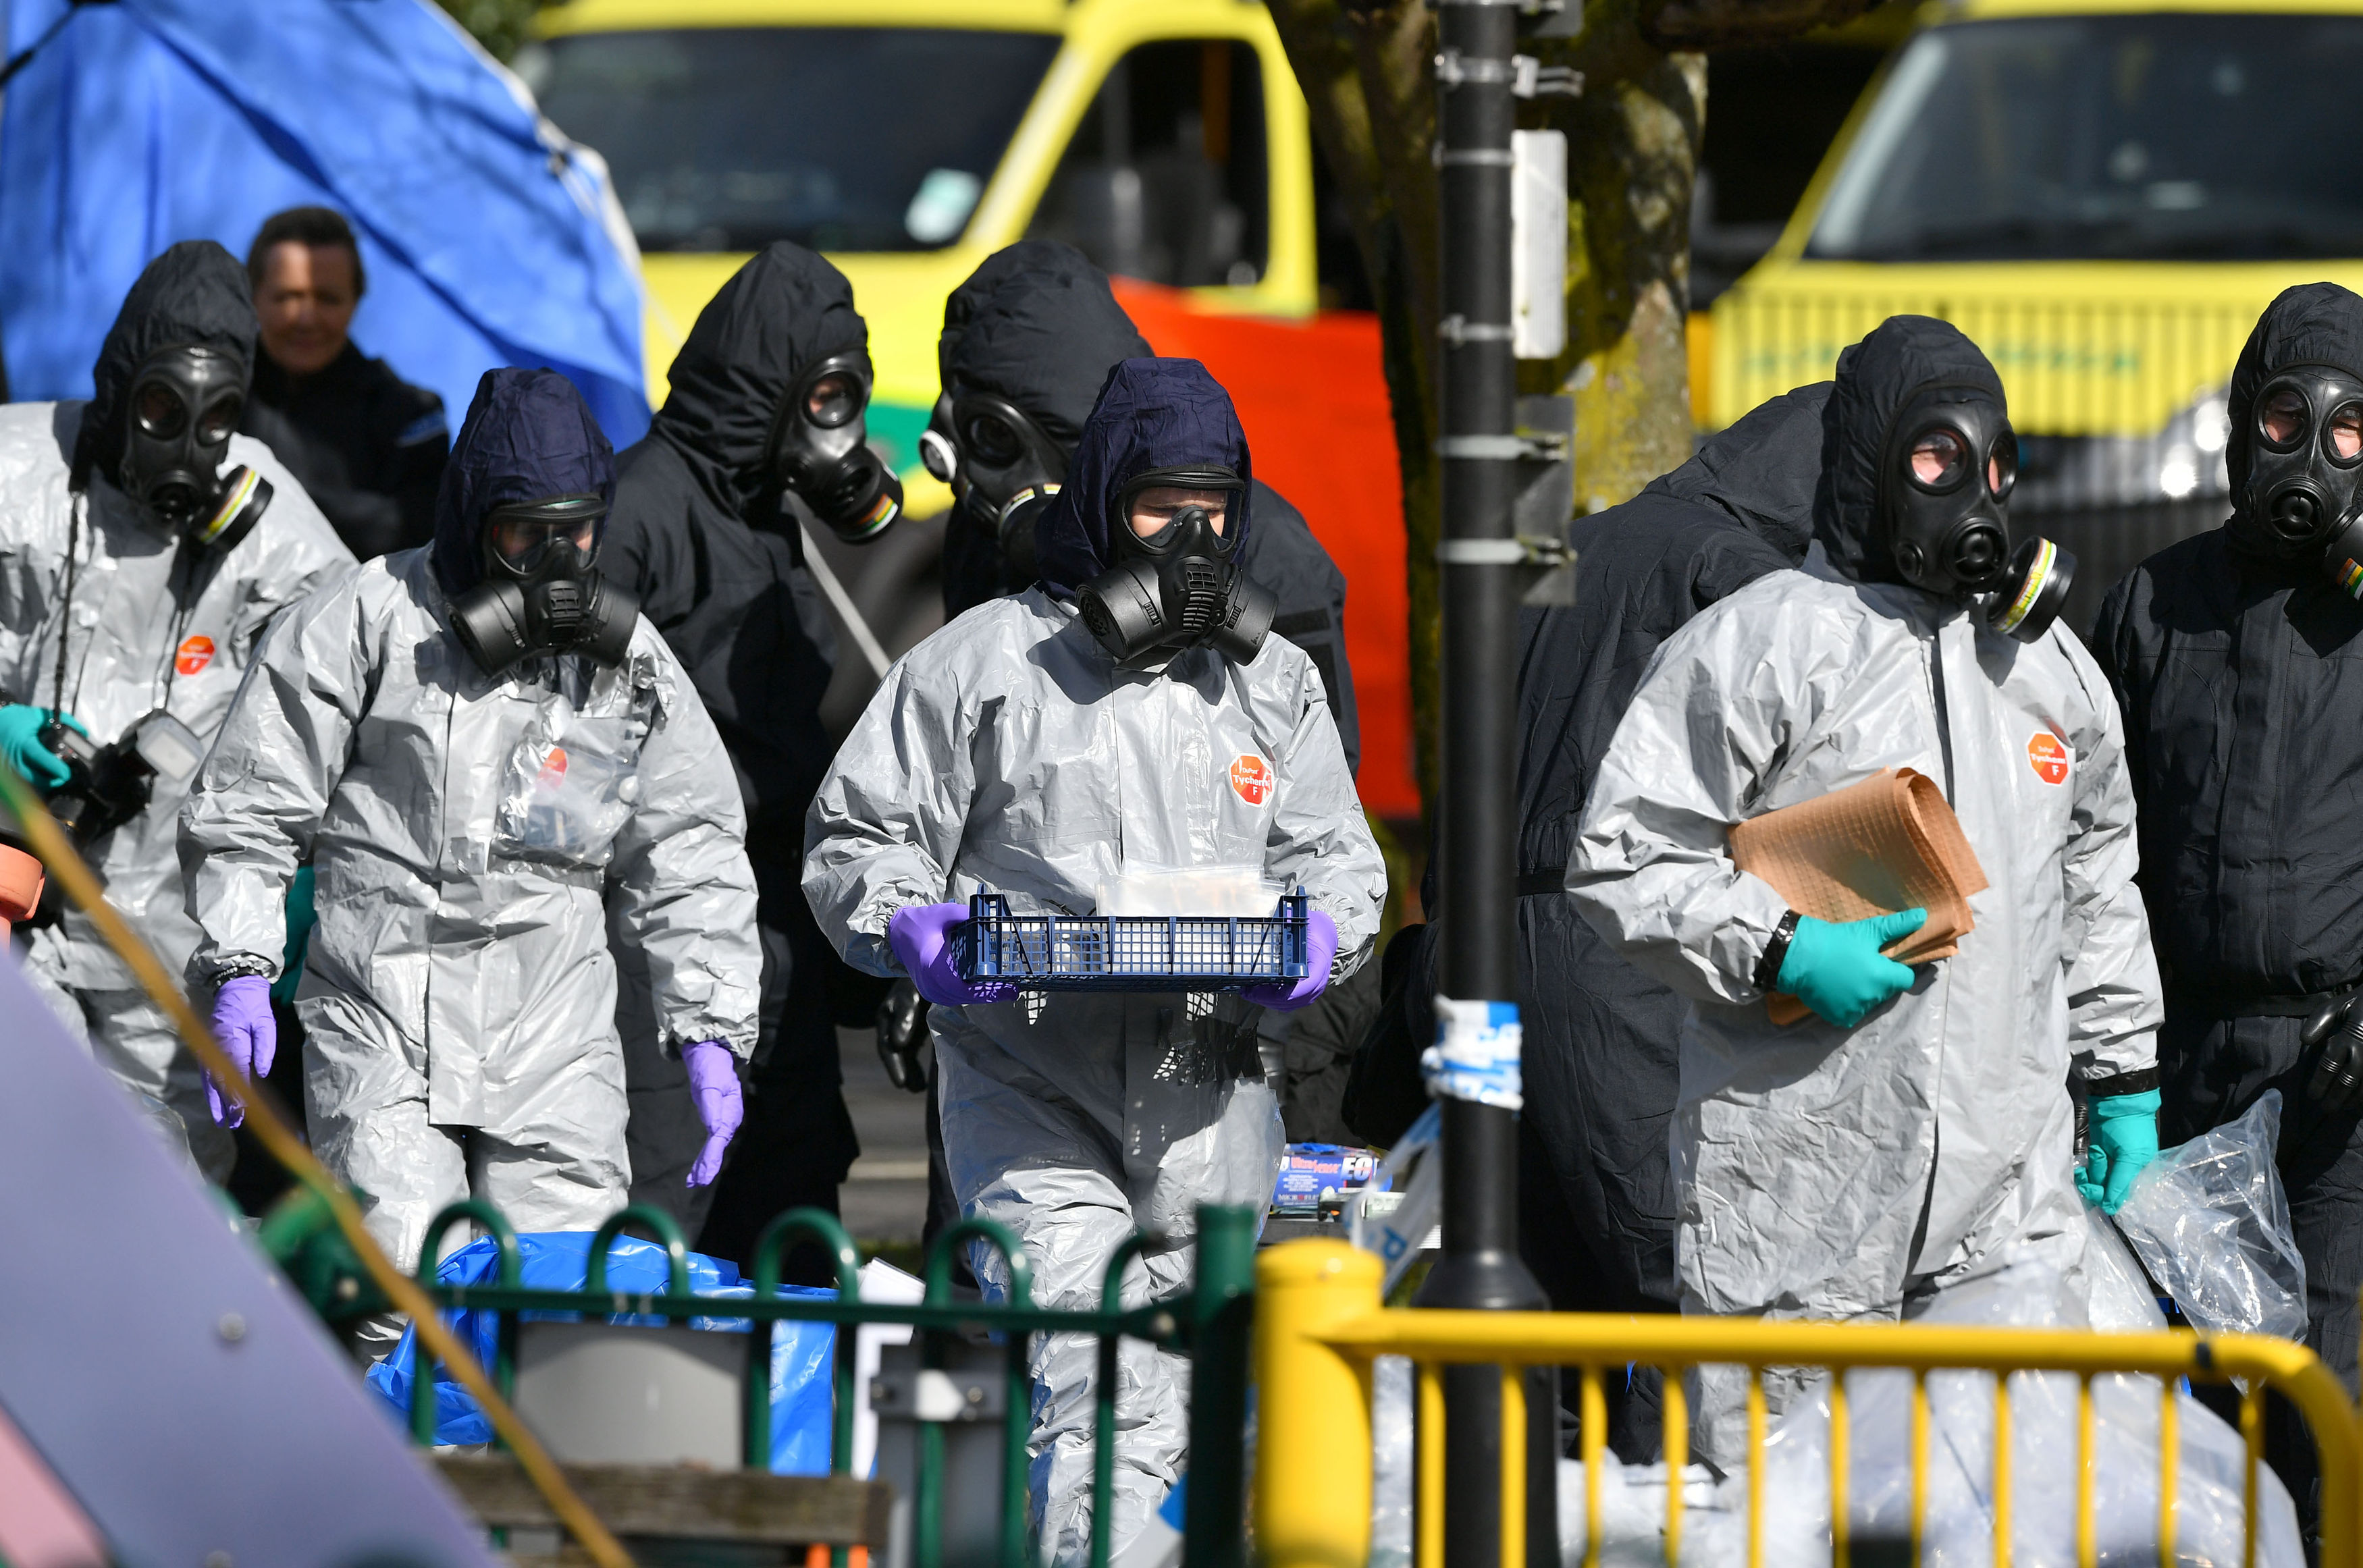 Unanswered Questions Linger Over the Salisbury Poisoning